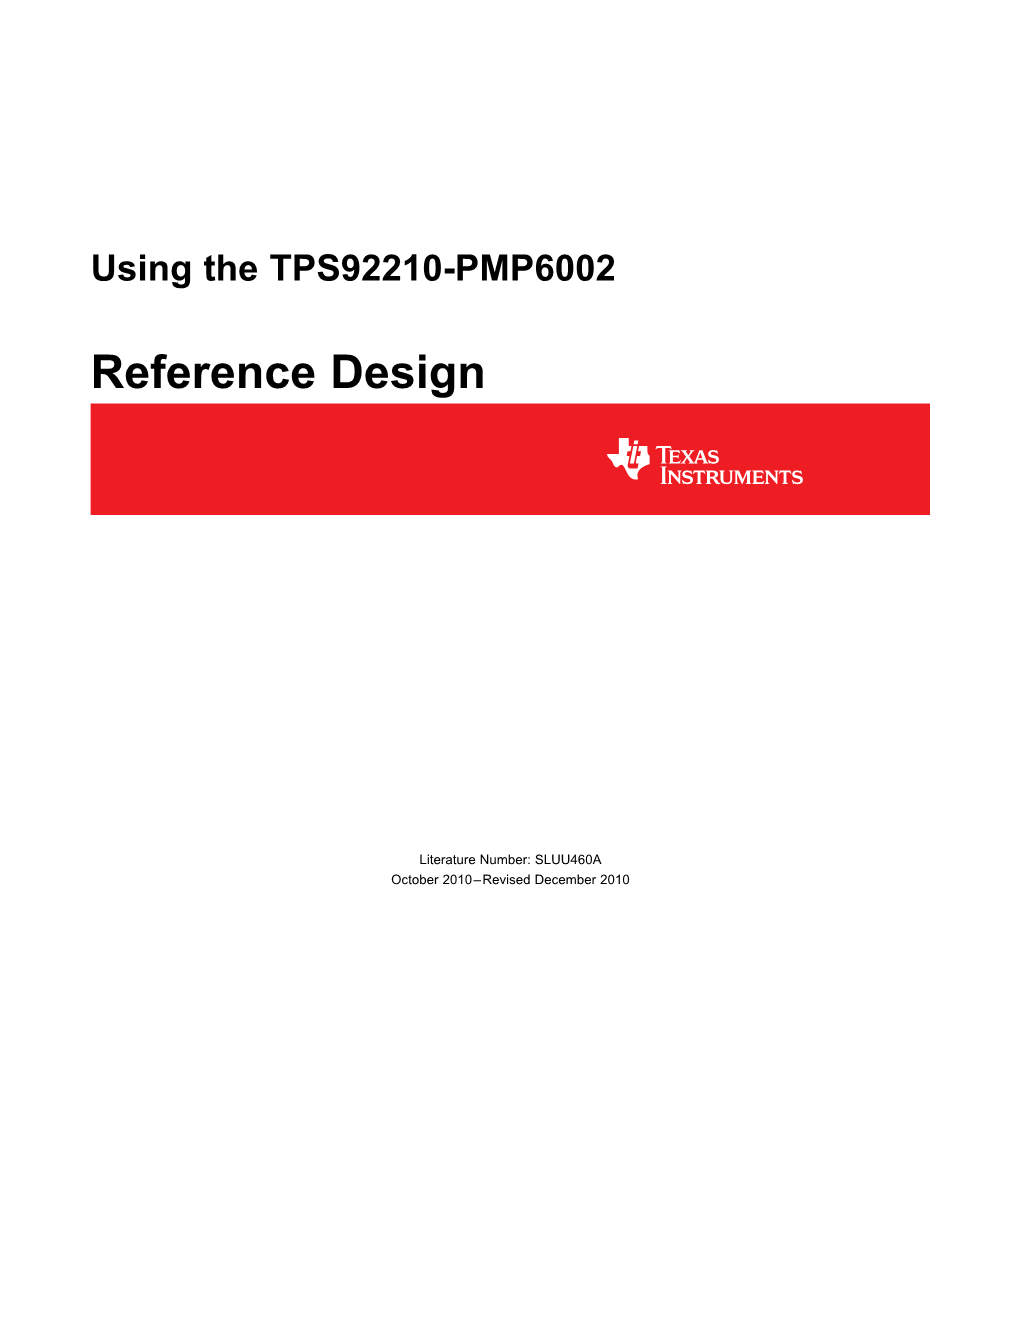 Using the TPS92210-PMP6002